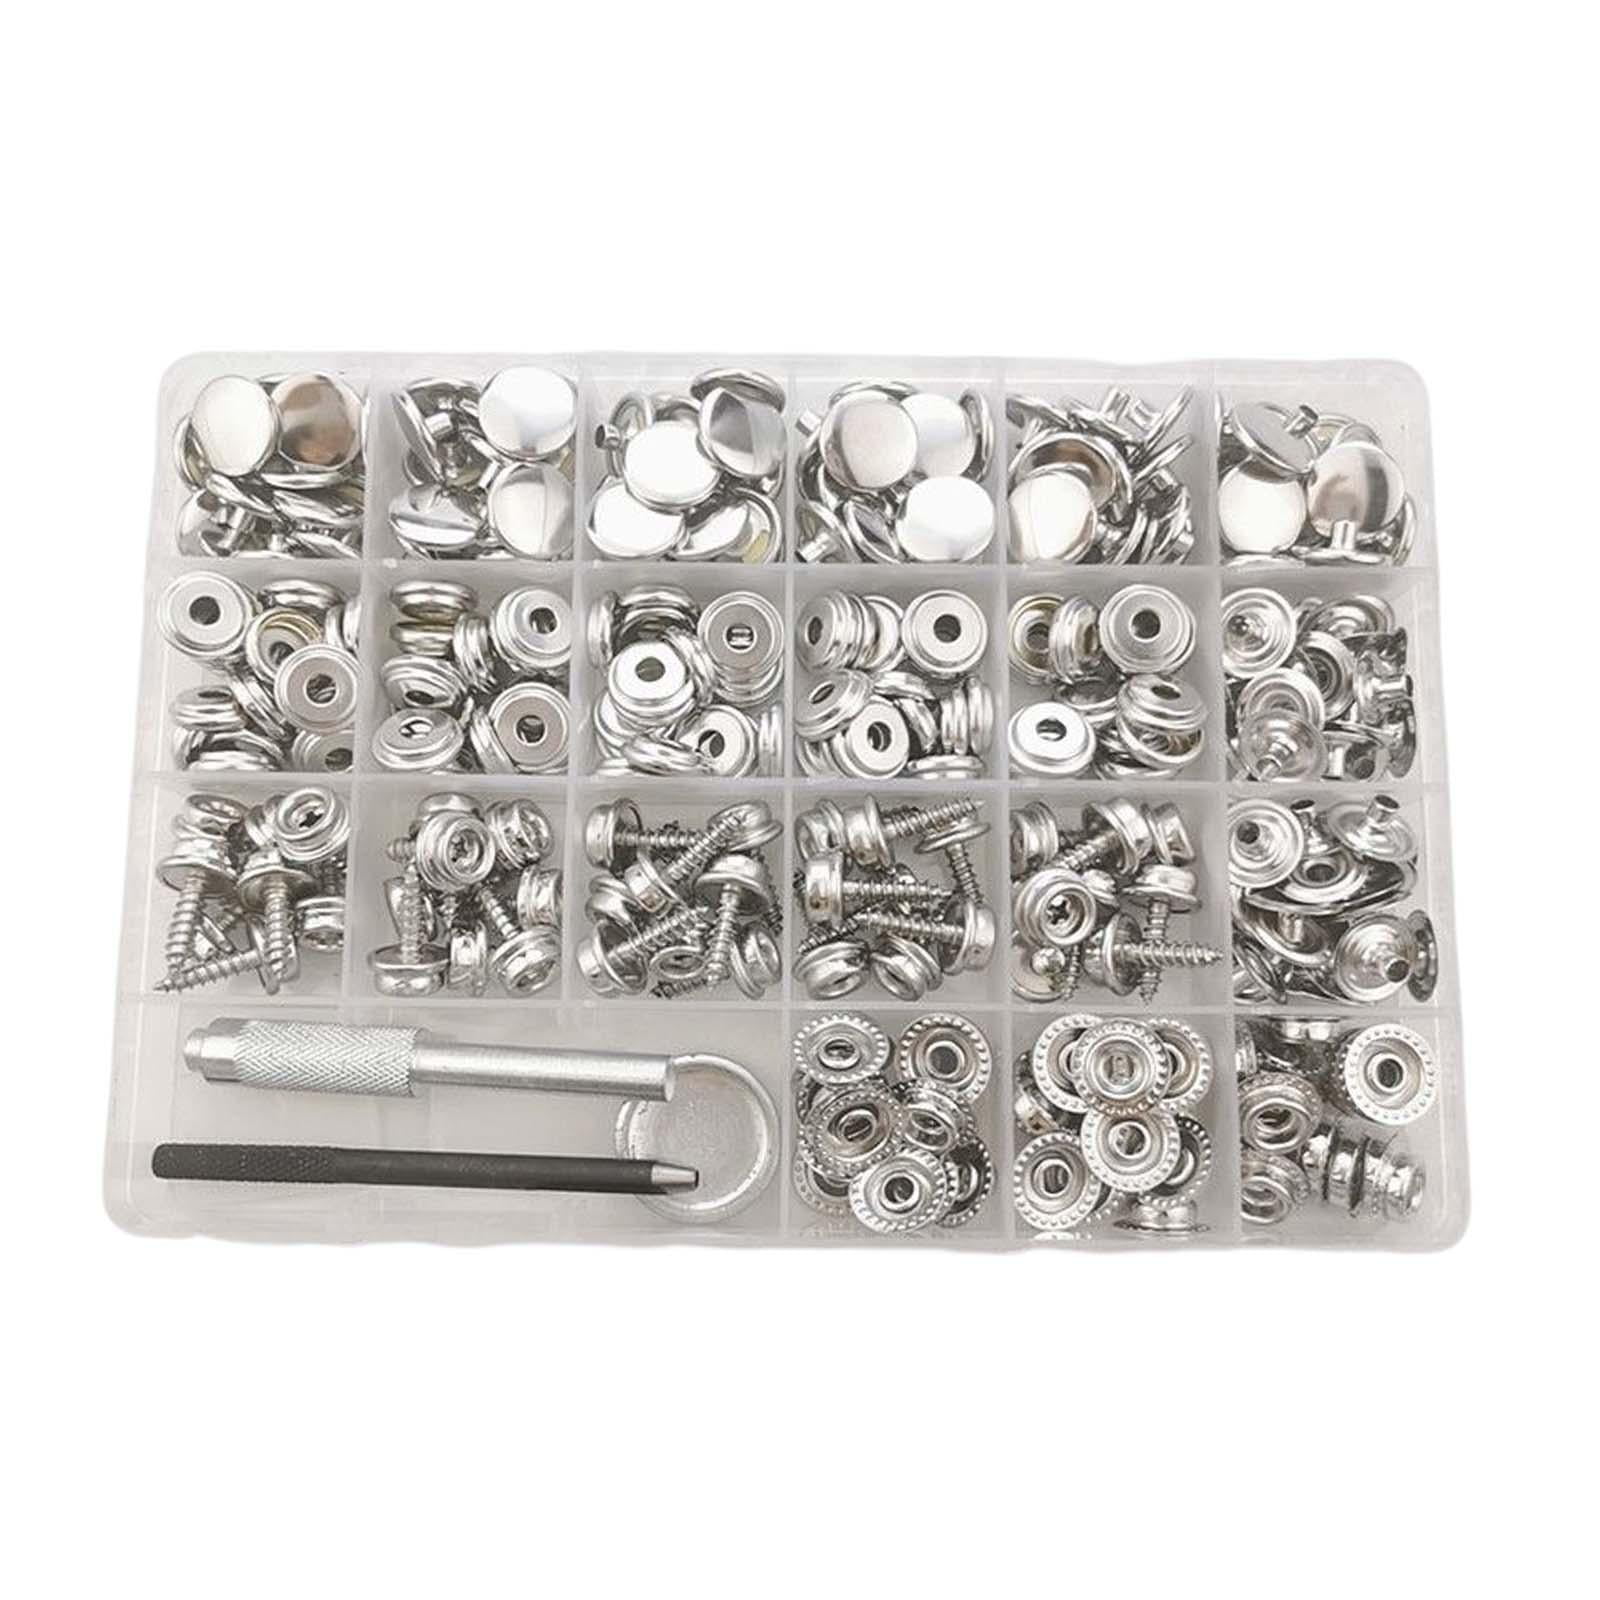  EXCEART 3 Sets Sewing Clasp Buttons snap Fasteners